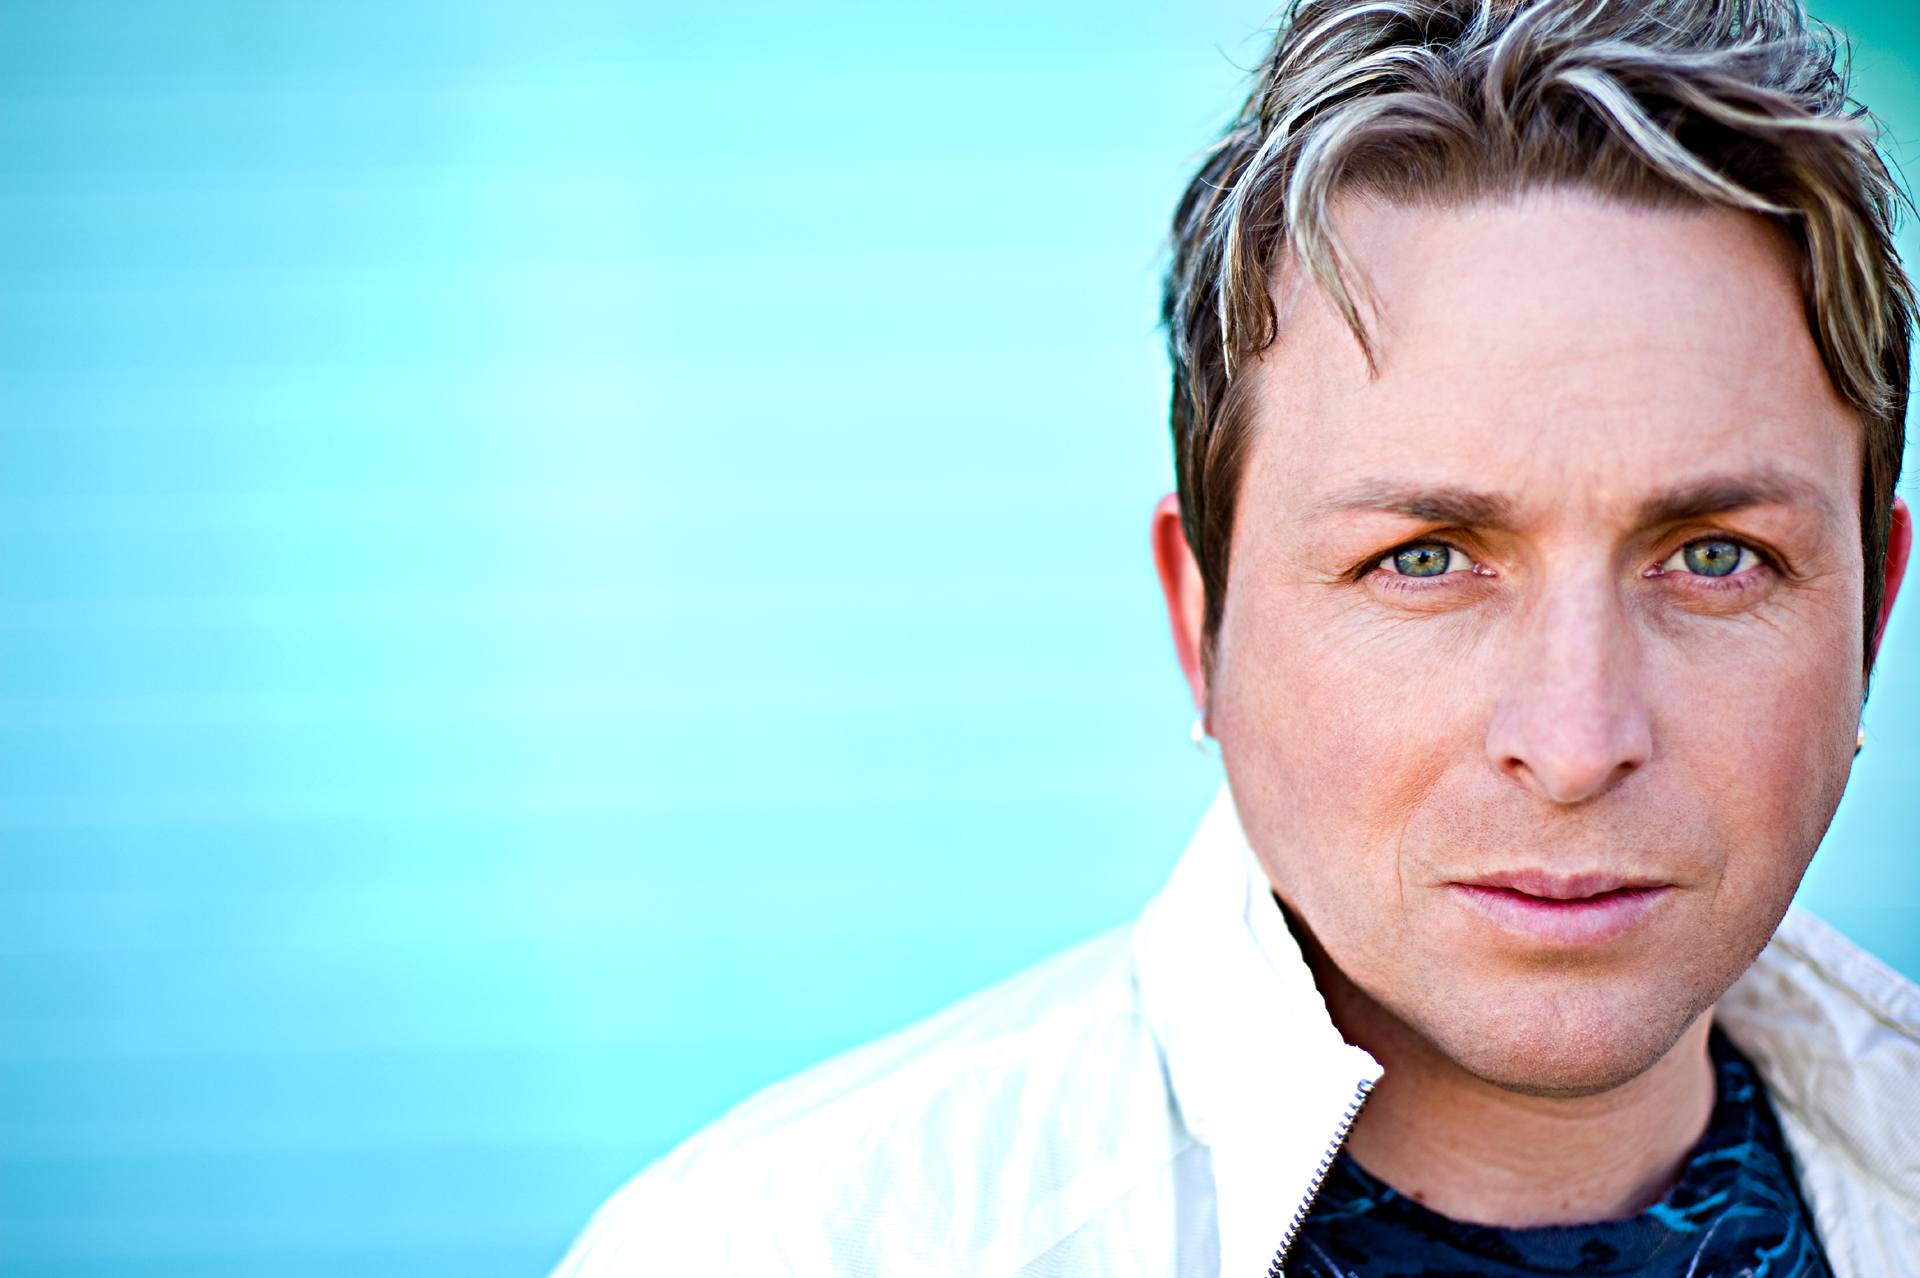 Singer/songwriter Johnny Reid is slated to perform July 24 in the Centrium during this year's Westerner Days Fair & Exposition.